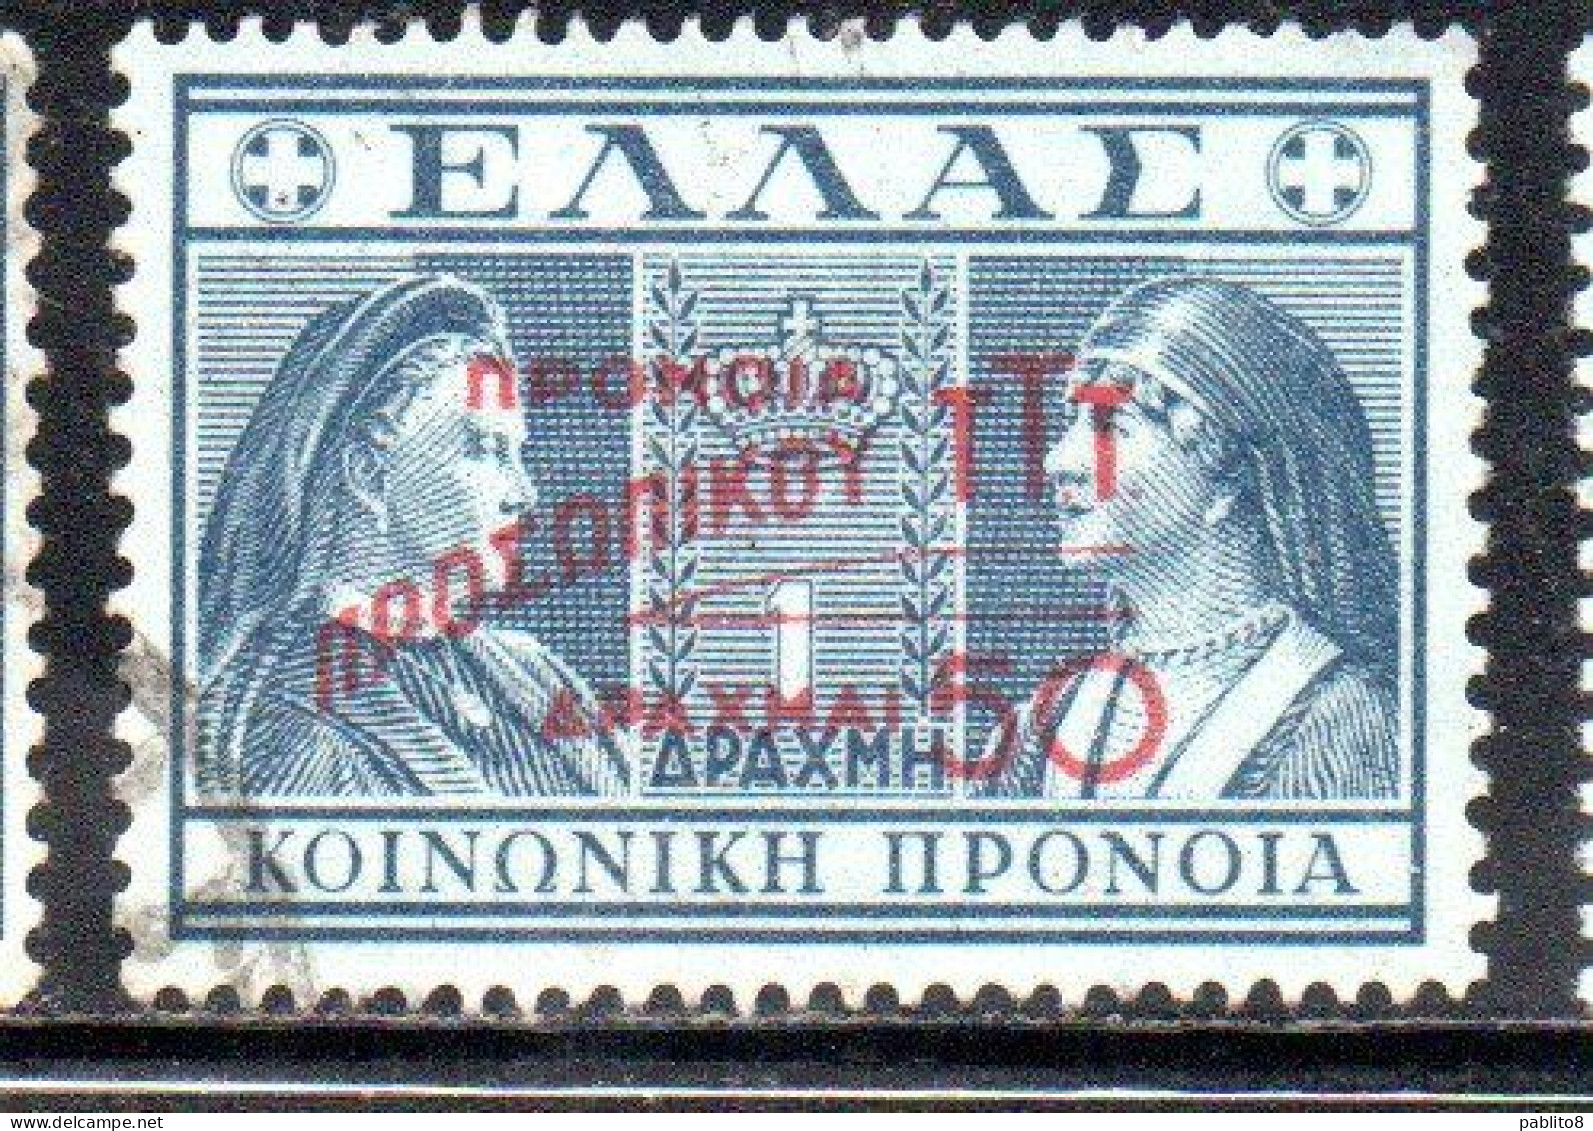 GREECE GRECIA ELLAS 1946 1947 POSTAL TAX STAMPS TUBERCULOSIS SURCHARGED 50d On 1d USED USATO OBLITERE' - Revenue Stamps